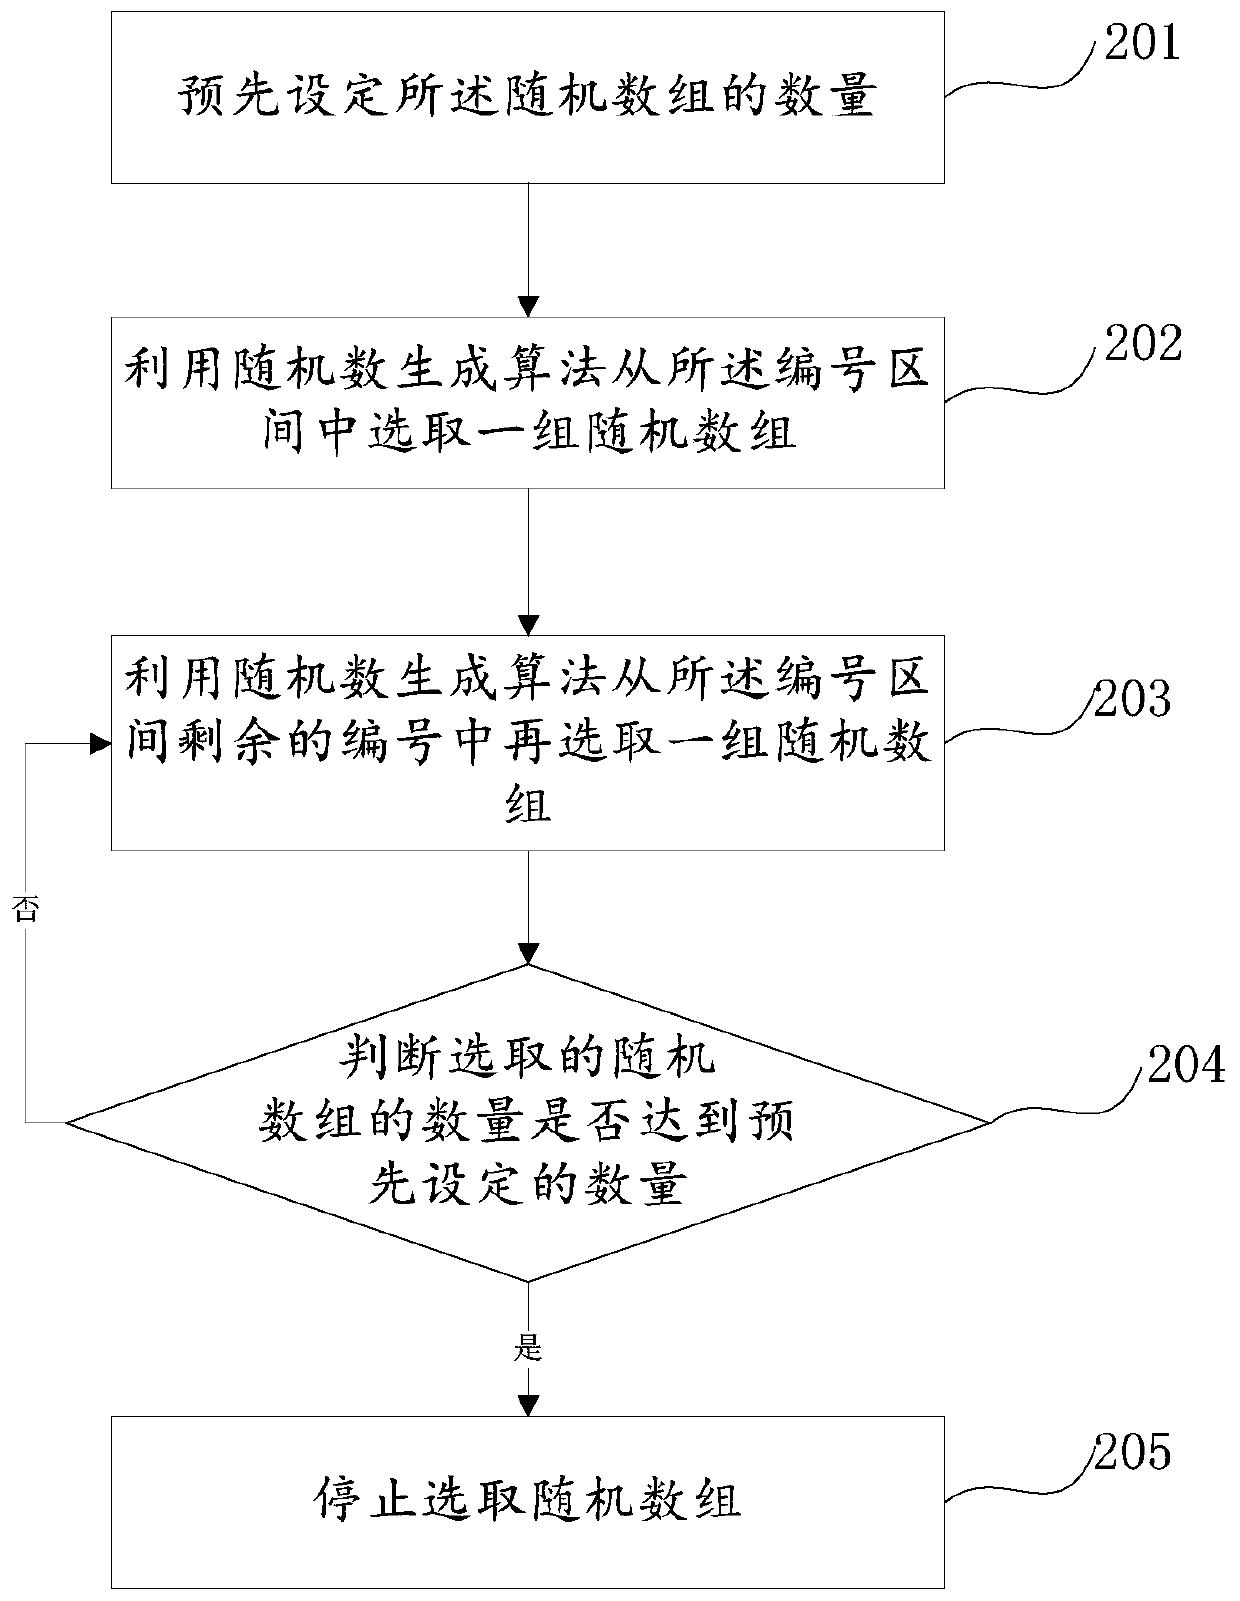 Distributed communication confirmation request management method and system